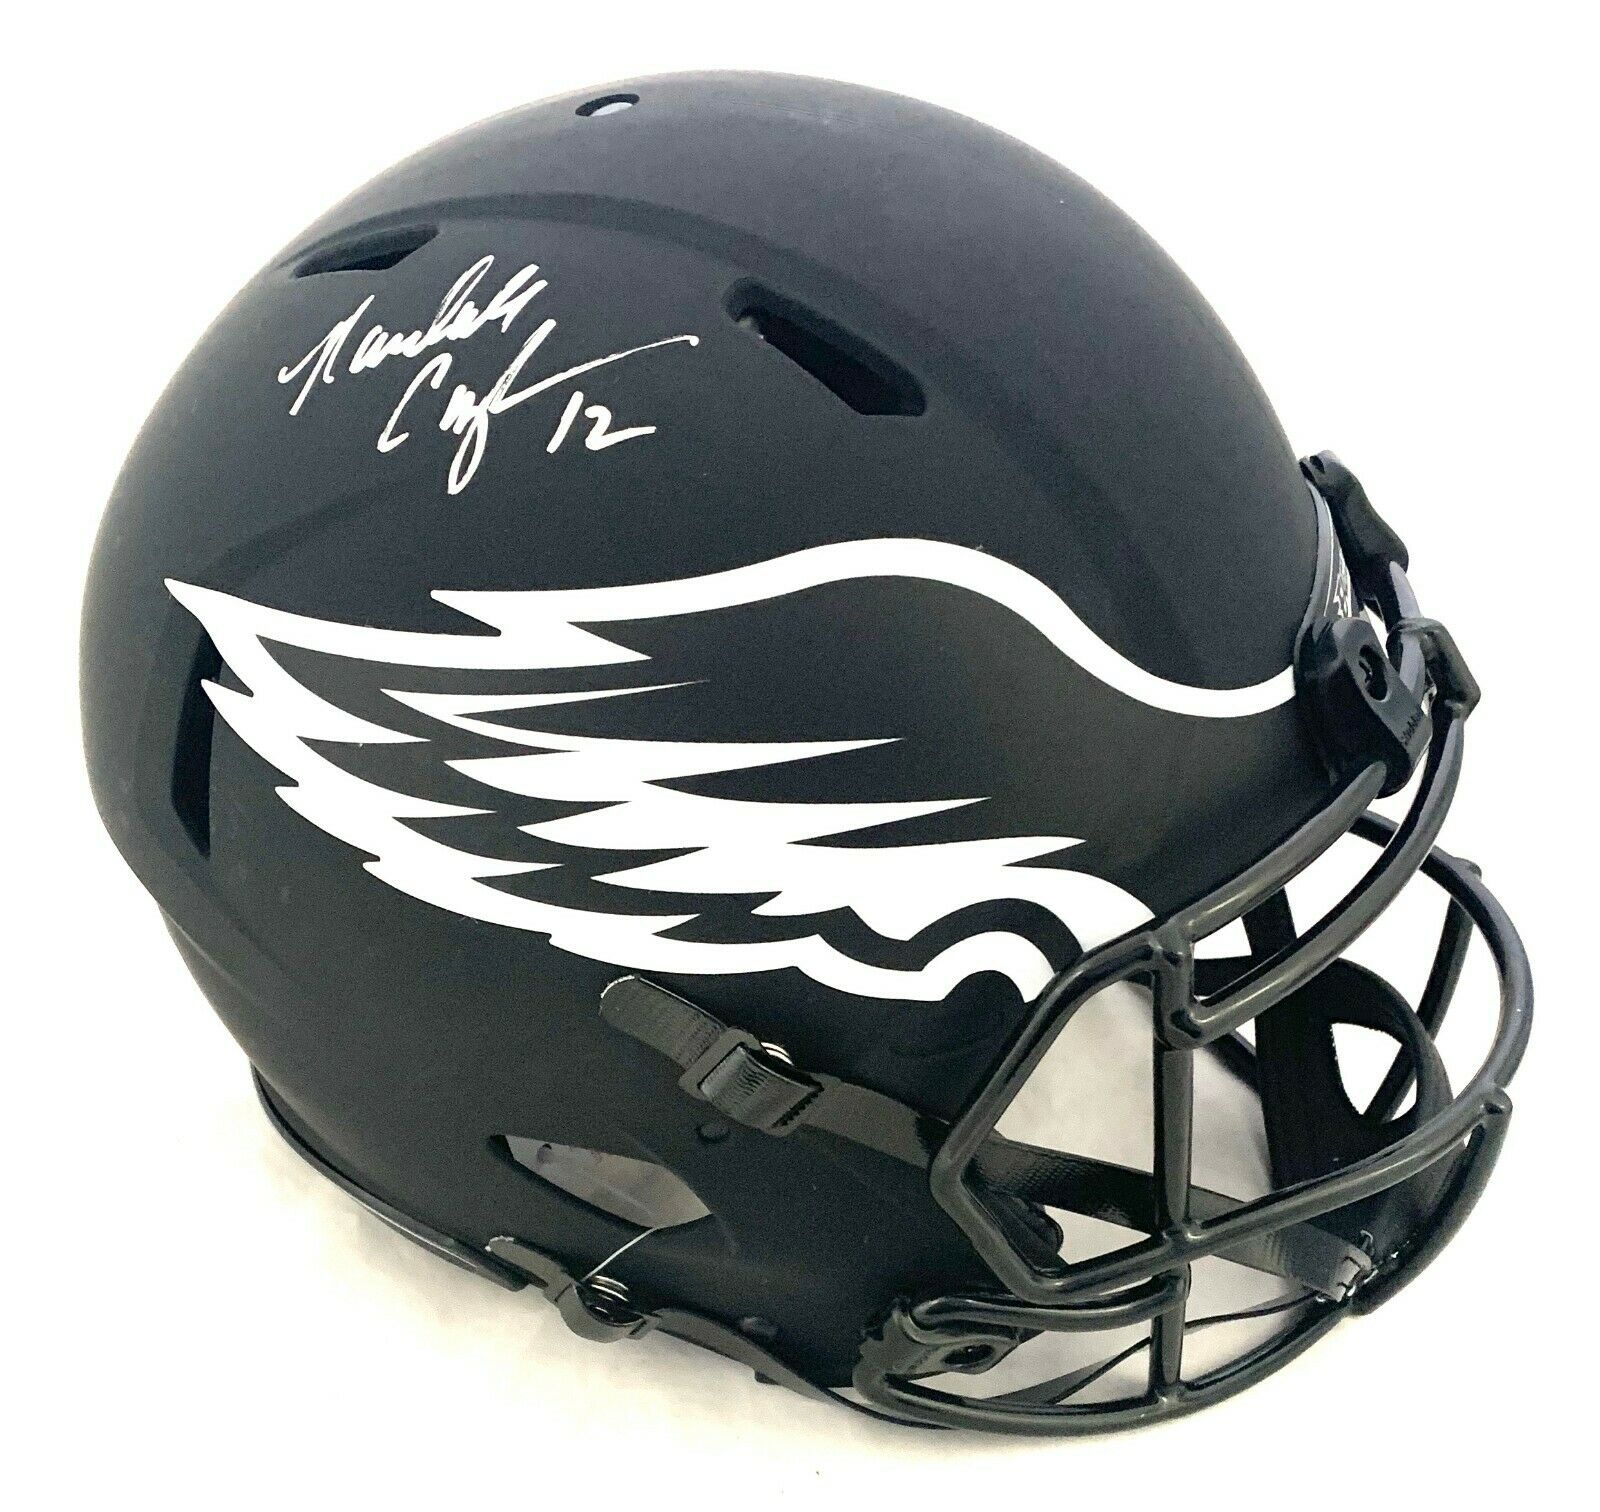  Brian Dawkins Autographed Eagles F/S Eclipse Speed